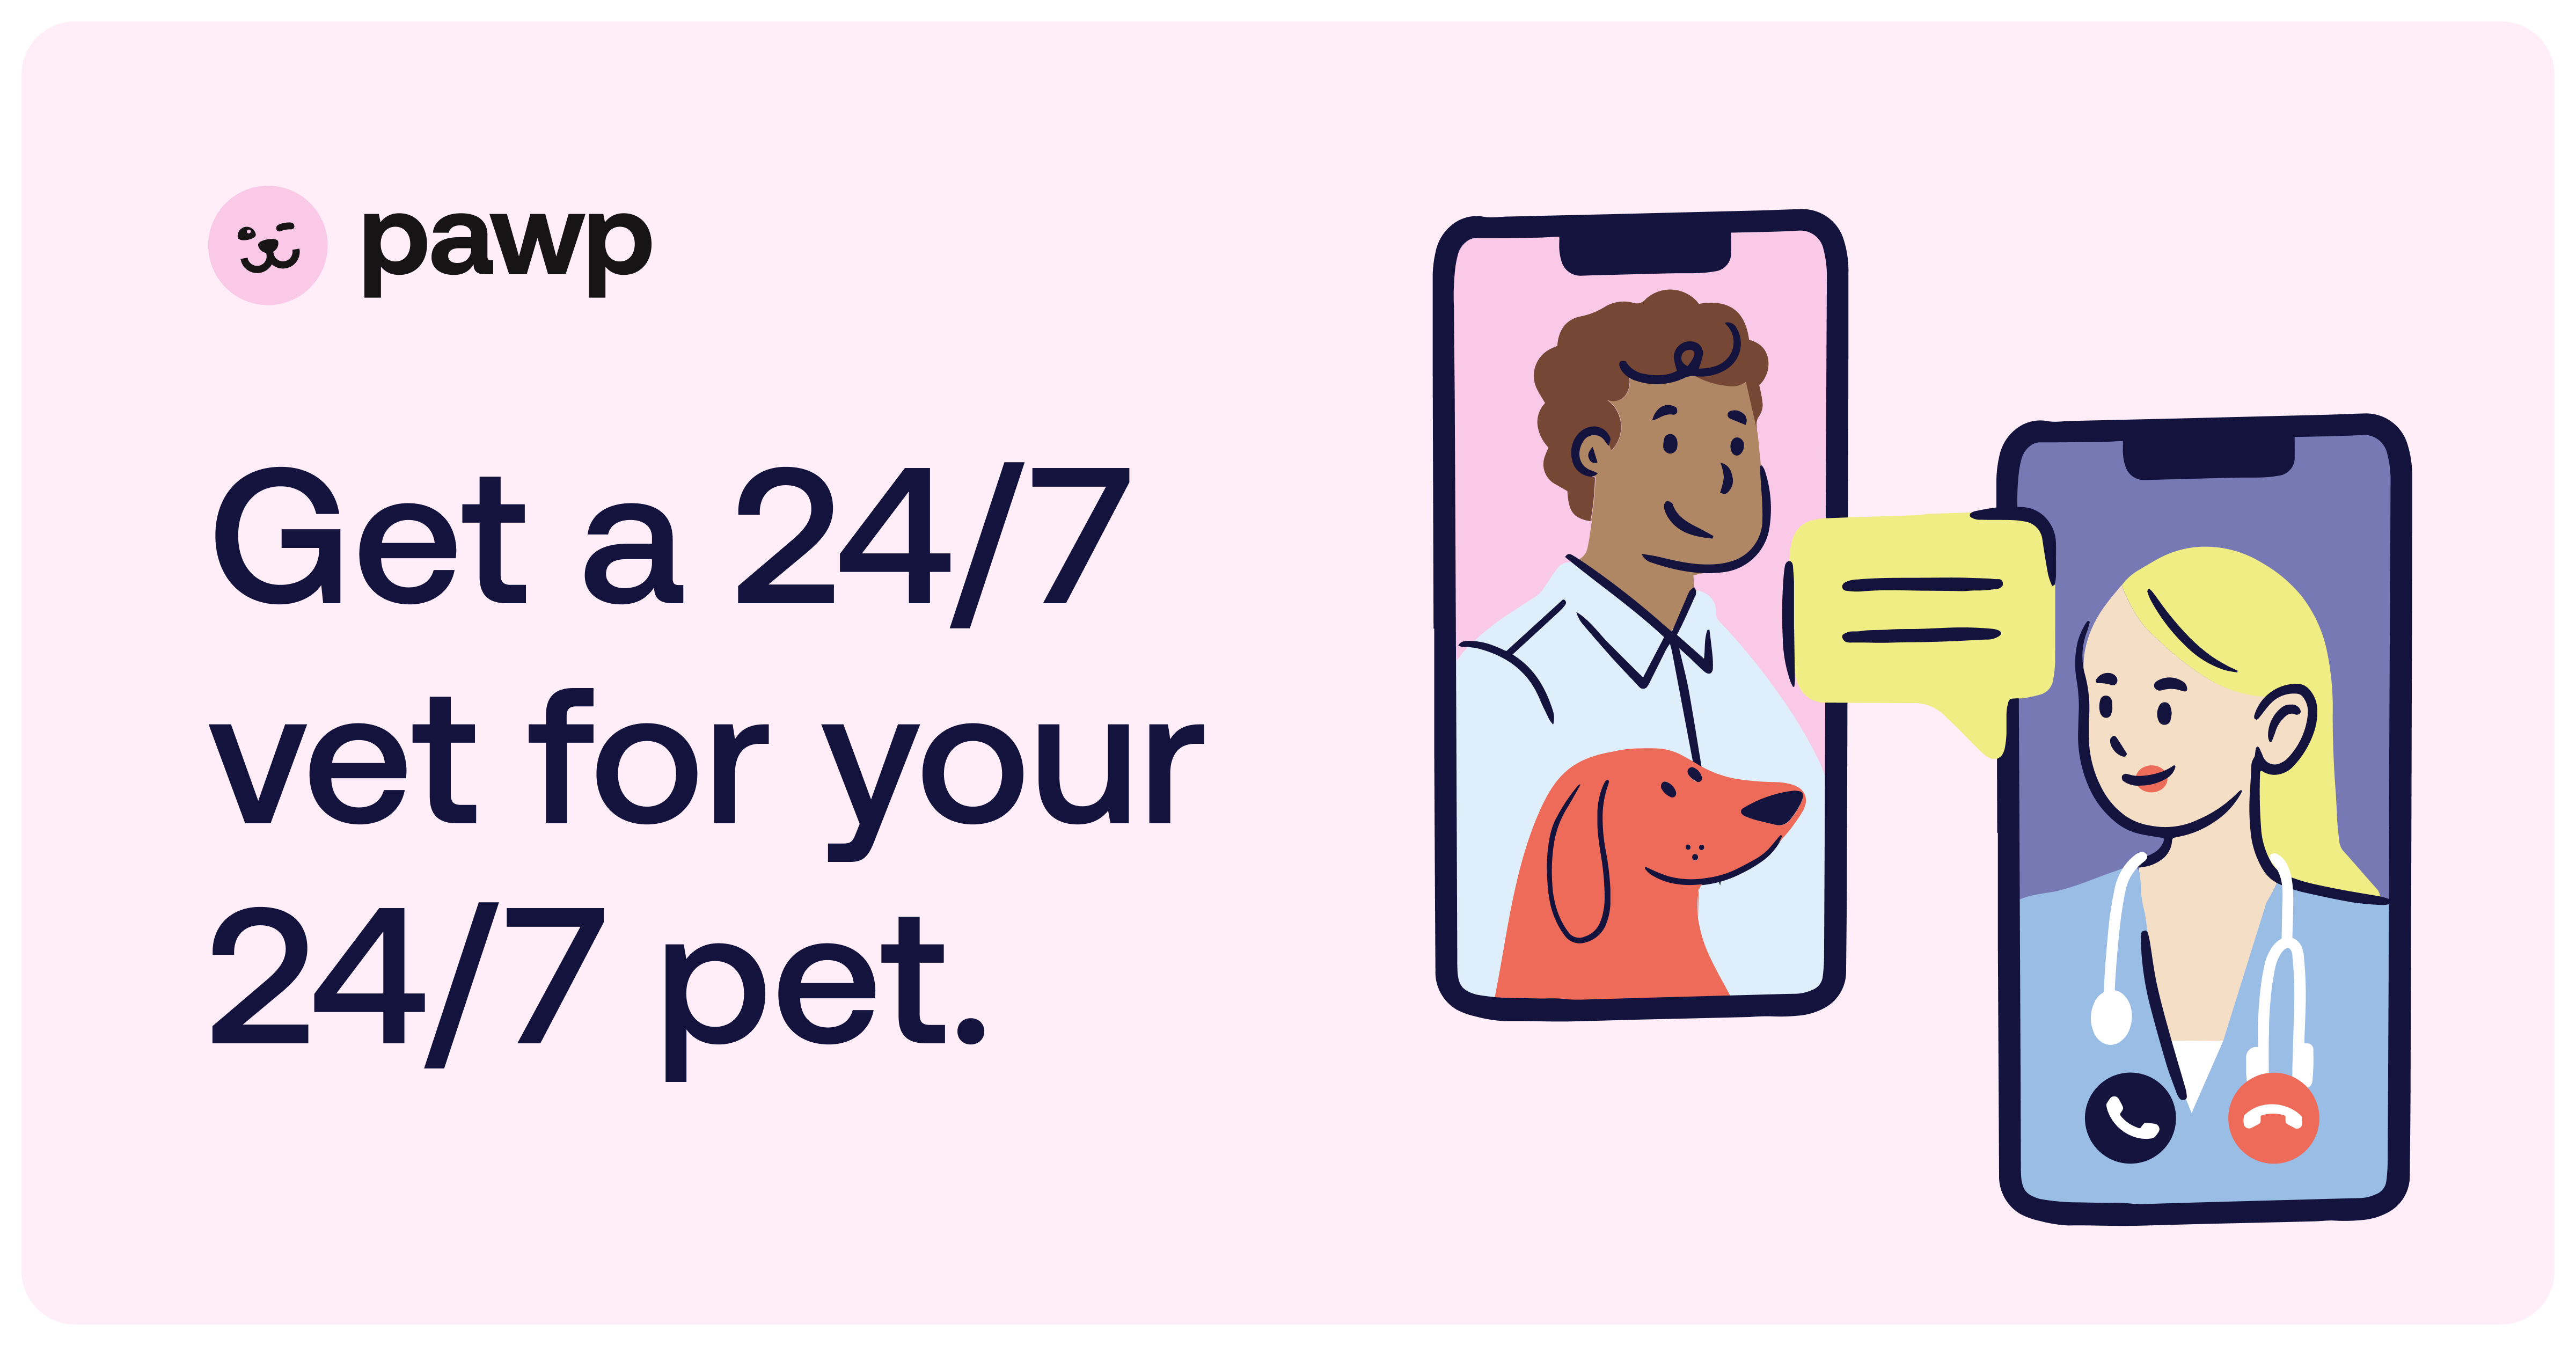 FREE 1-Year of Unlimited Pawp Vet Care